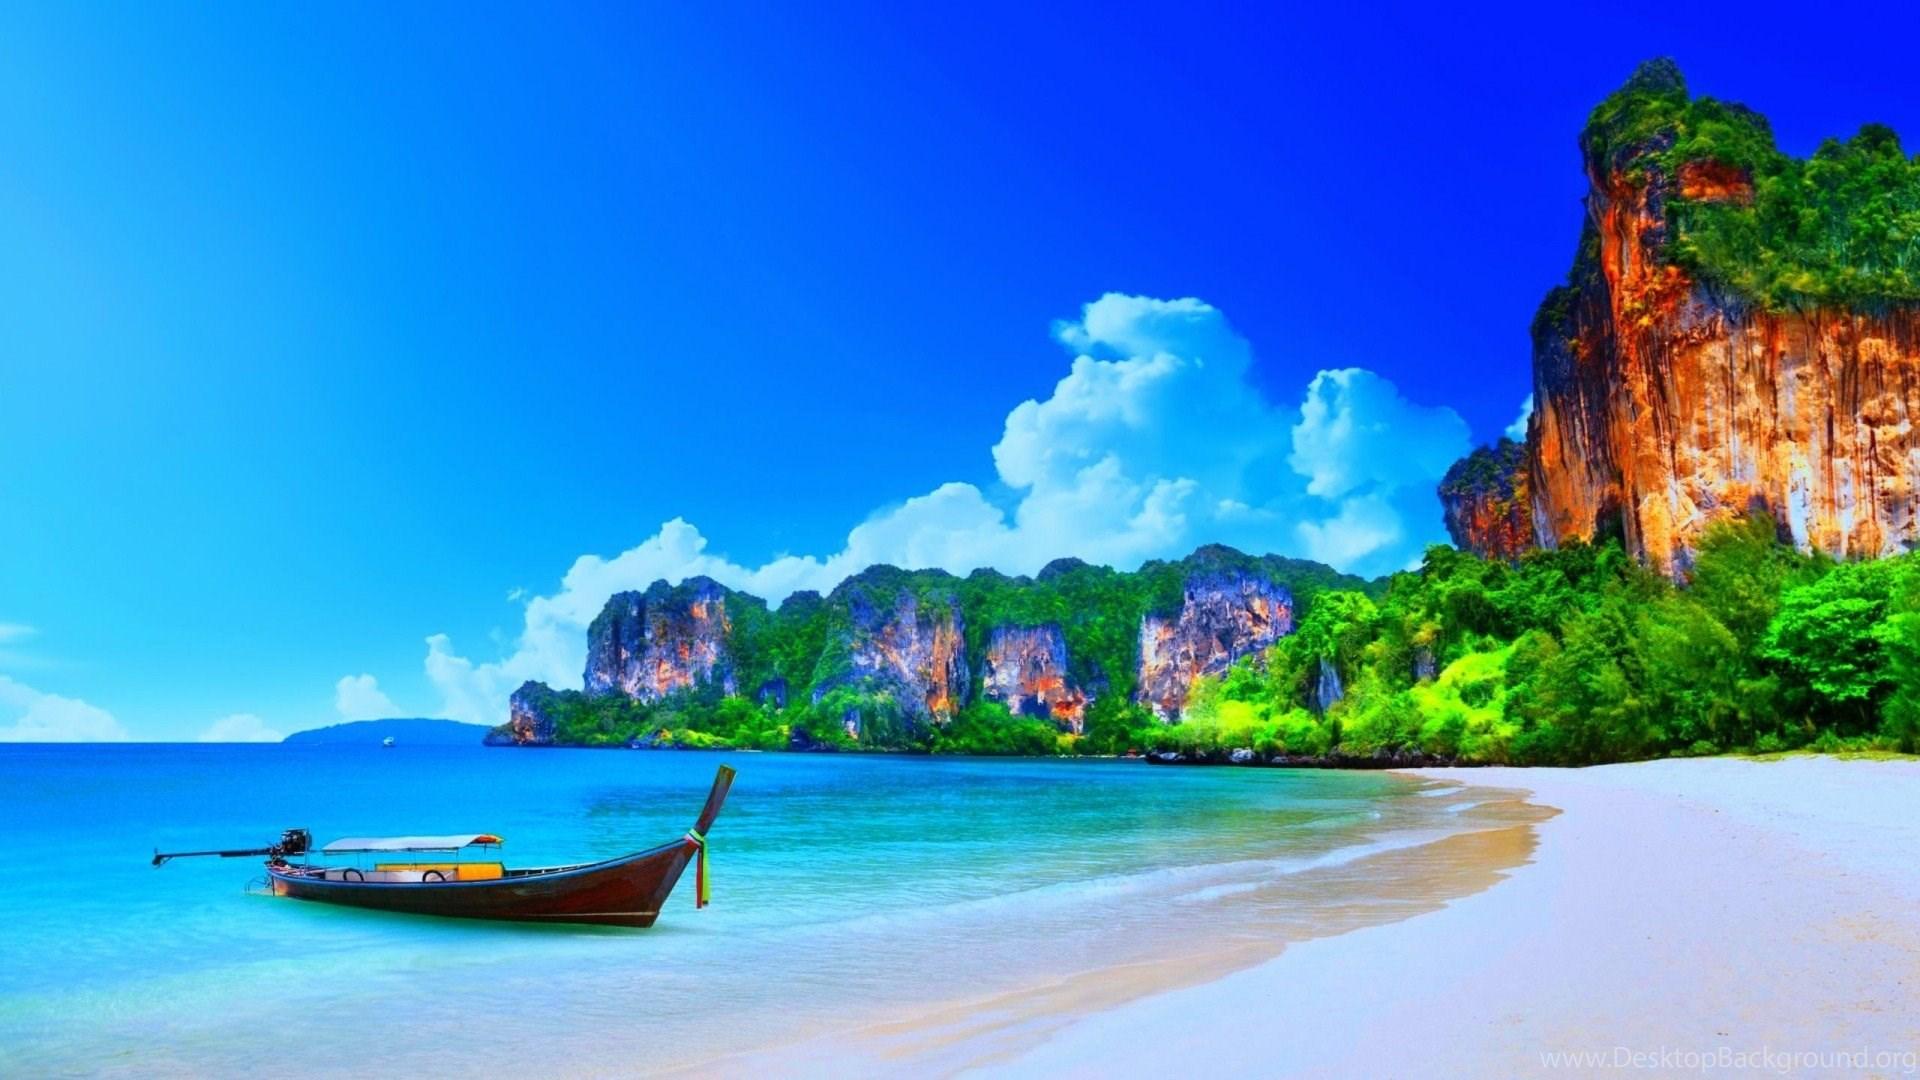 Thailand Nature Wallpapers - Top Free Thailand Nature Backgrounds